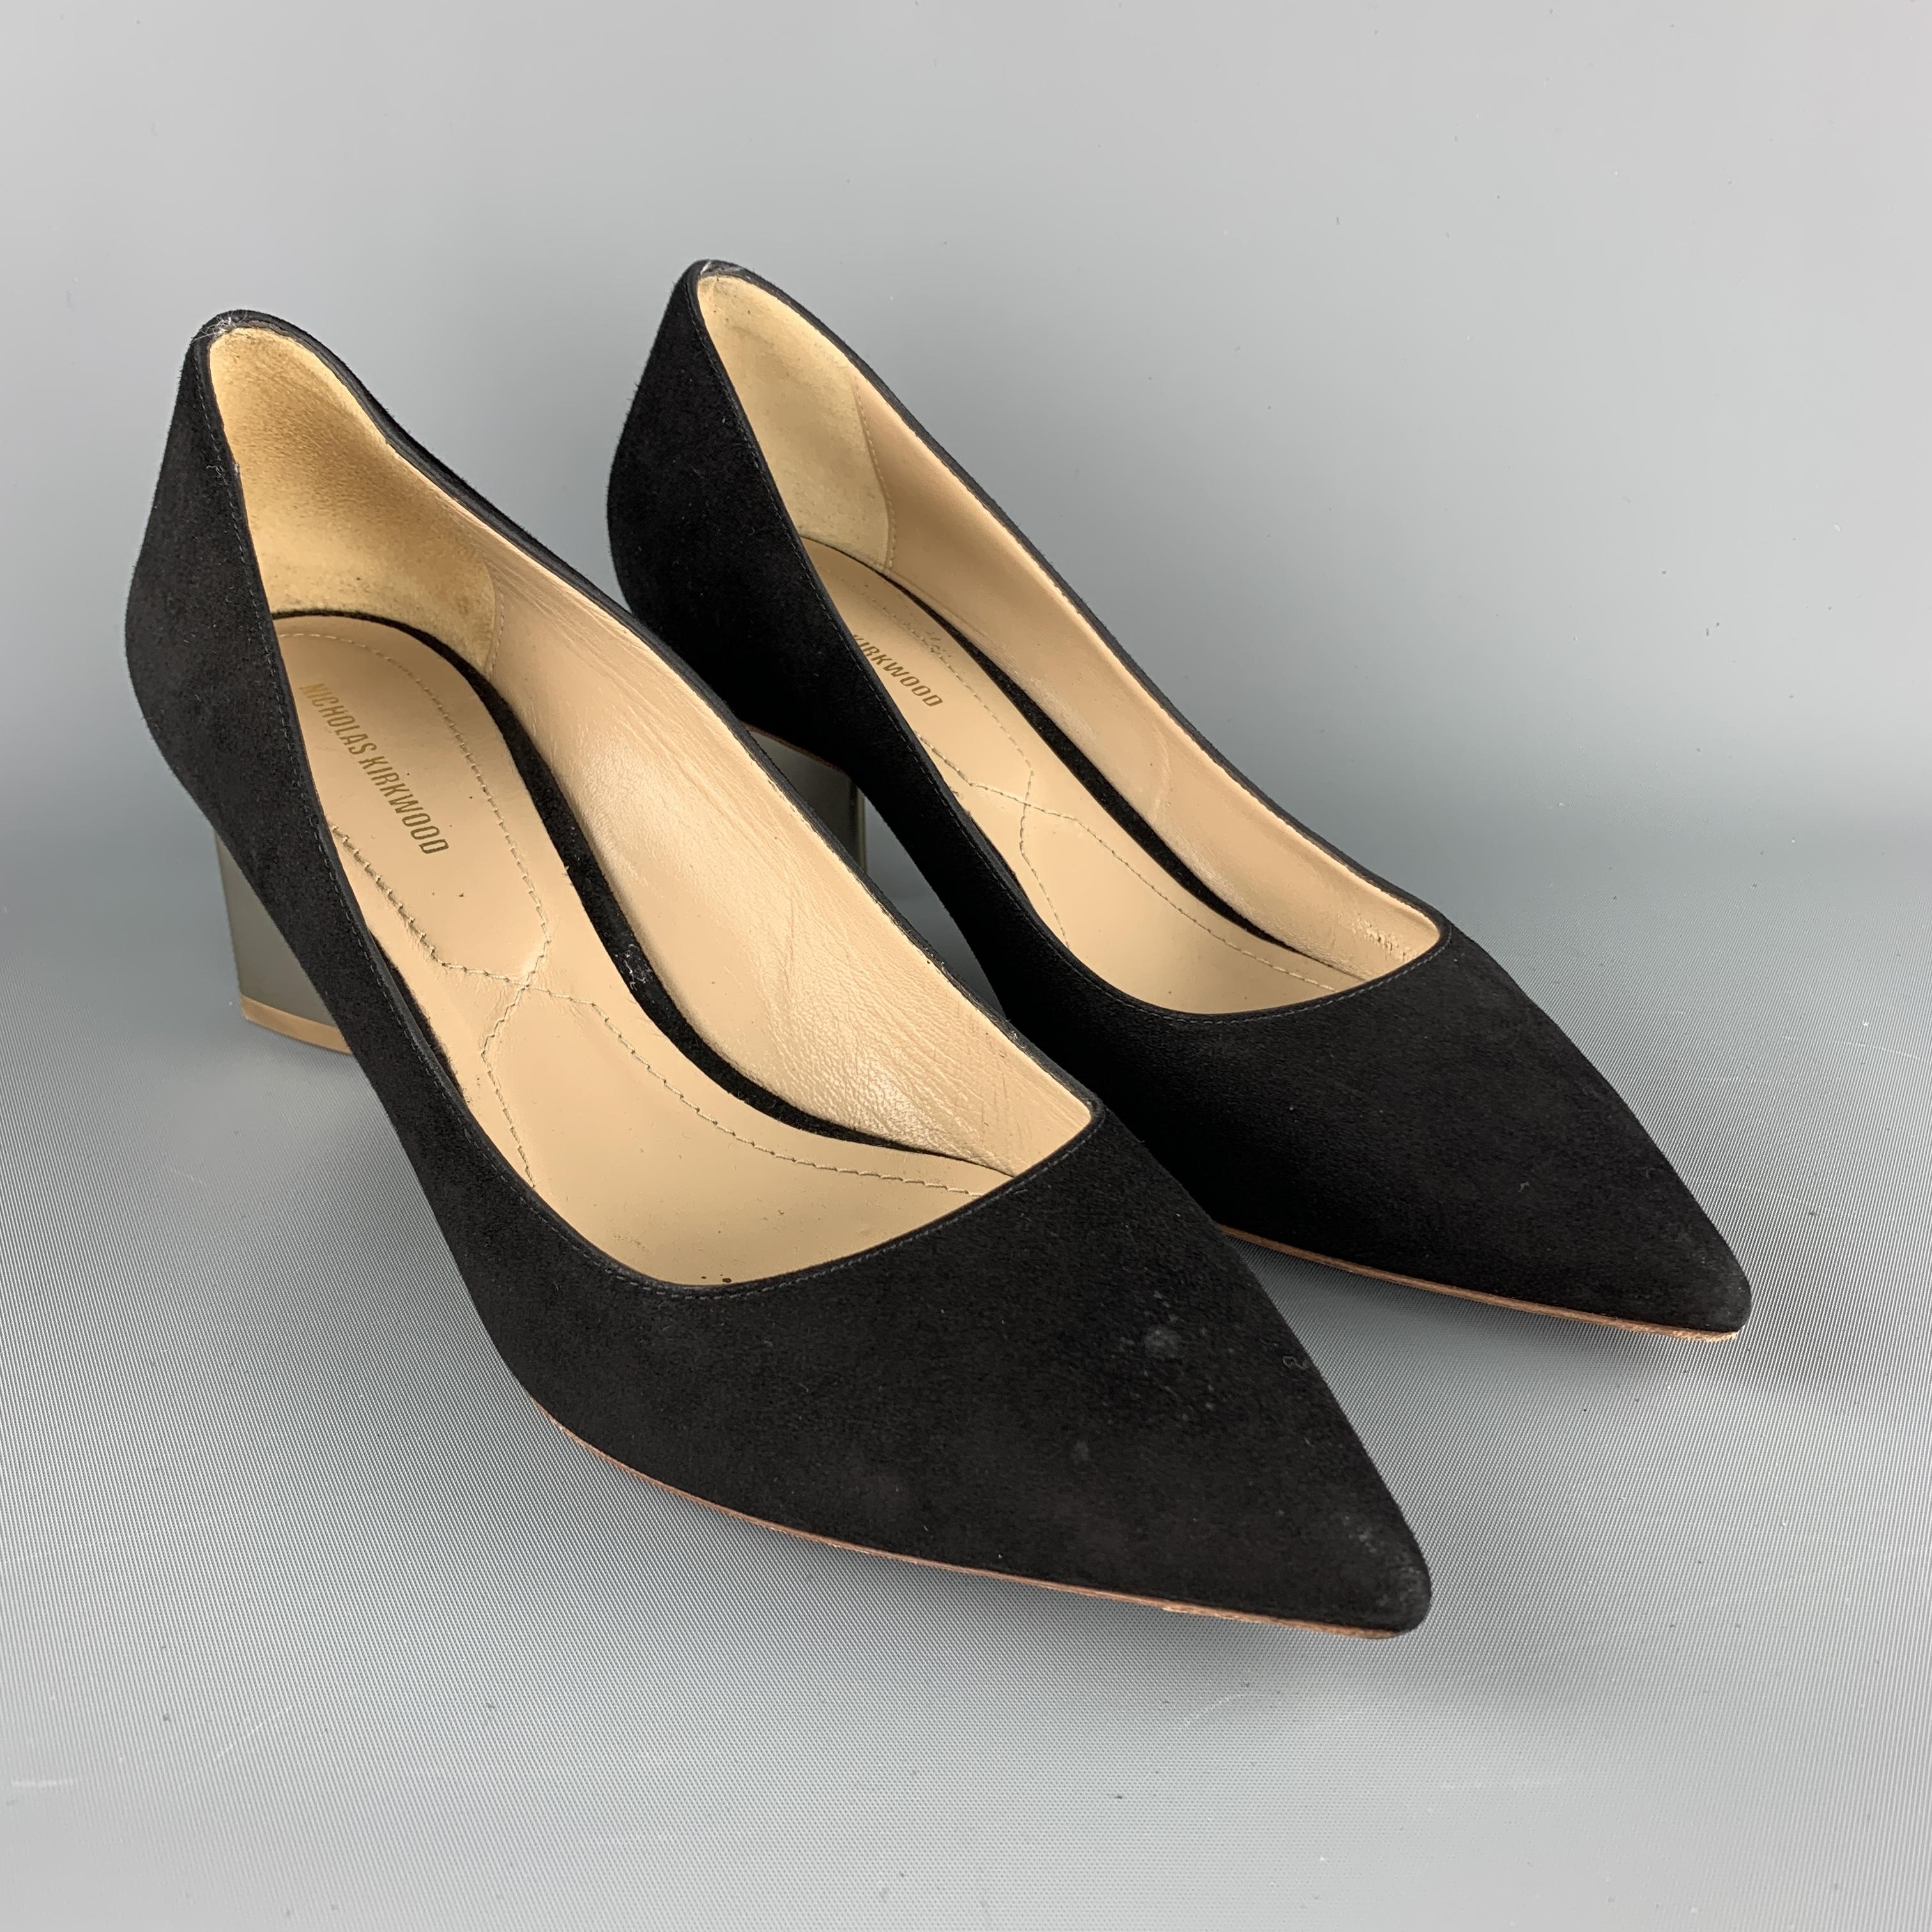 NICHOLAS KIRKWOOD pumps come in black suede with a pointed toe and gold tone metal geometric heel. Made in Italy.

Very Good Pre-Owned Condition.
Marked: IT 39.5
Original Retail Price: $595.00

Heel: 2.5 in.